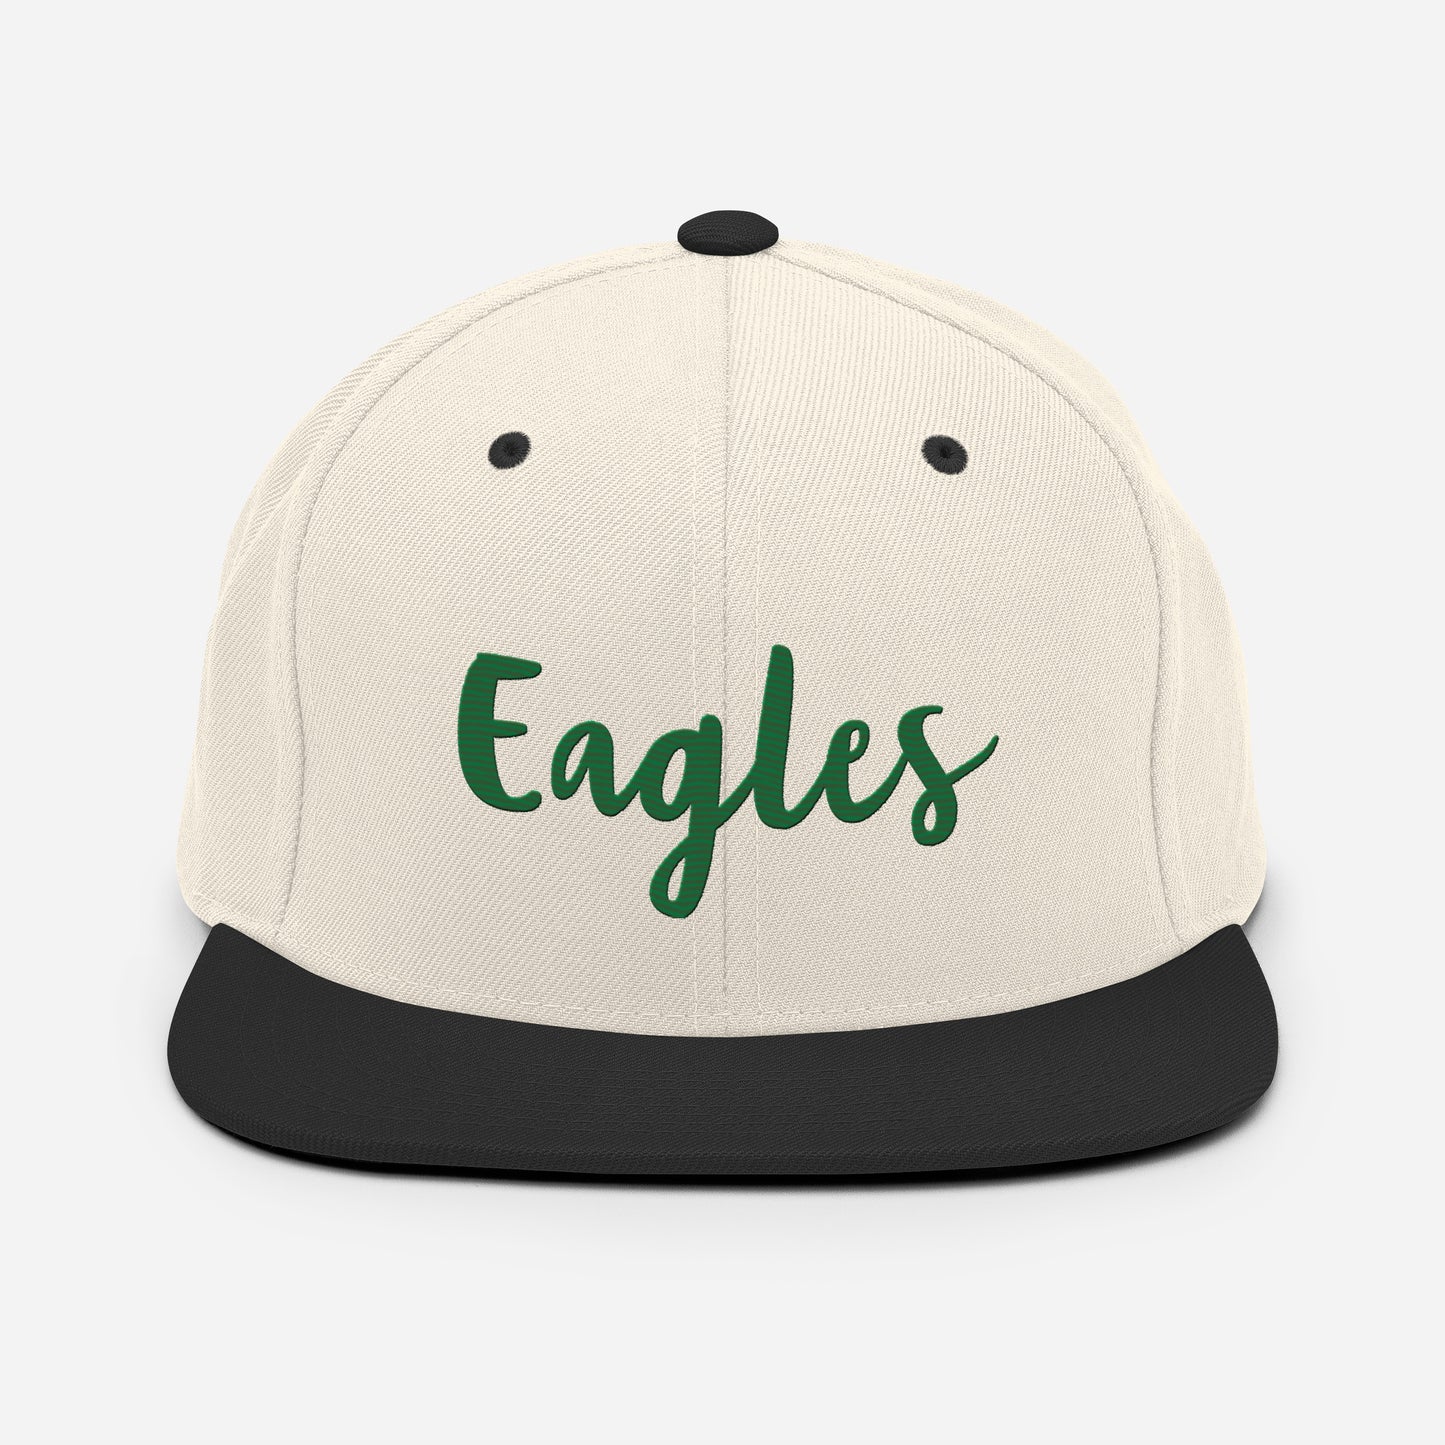 Eagles Hand Embroidered Snapback Hat